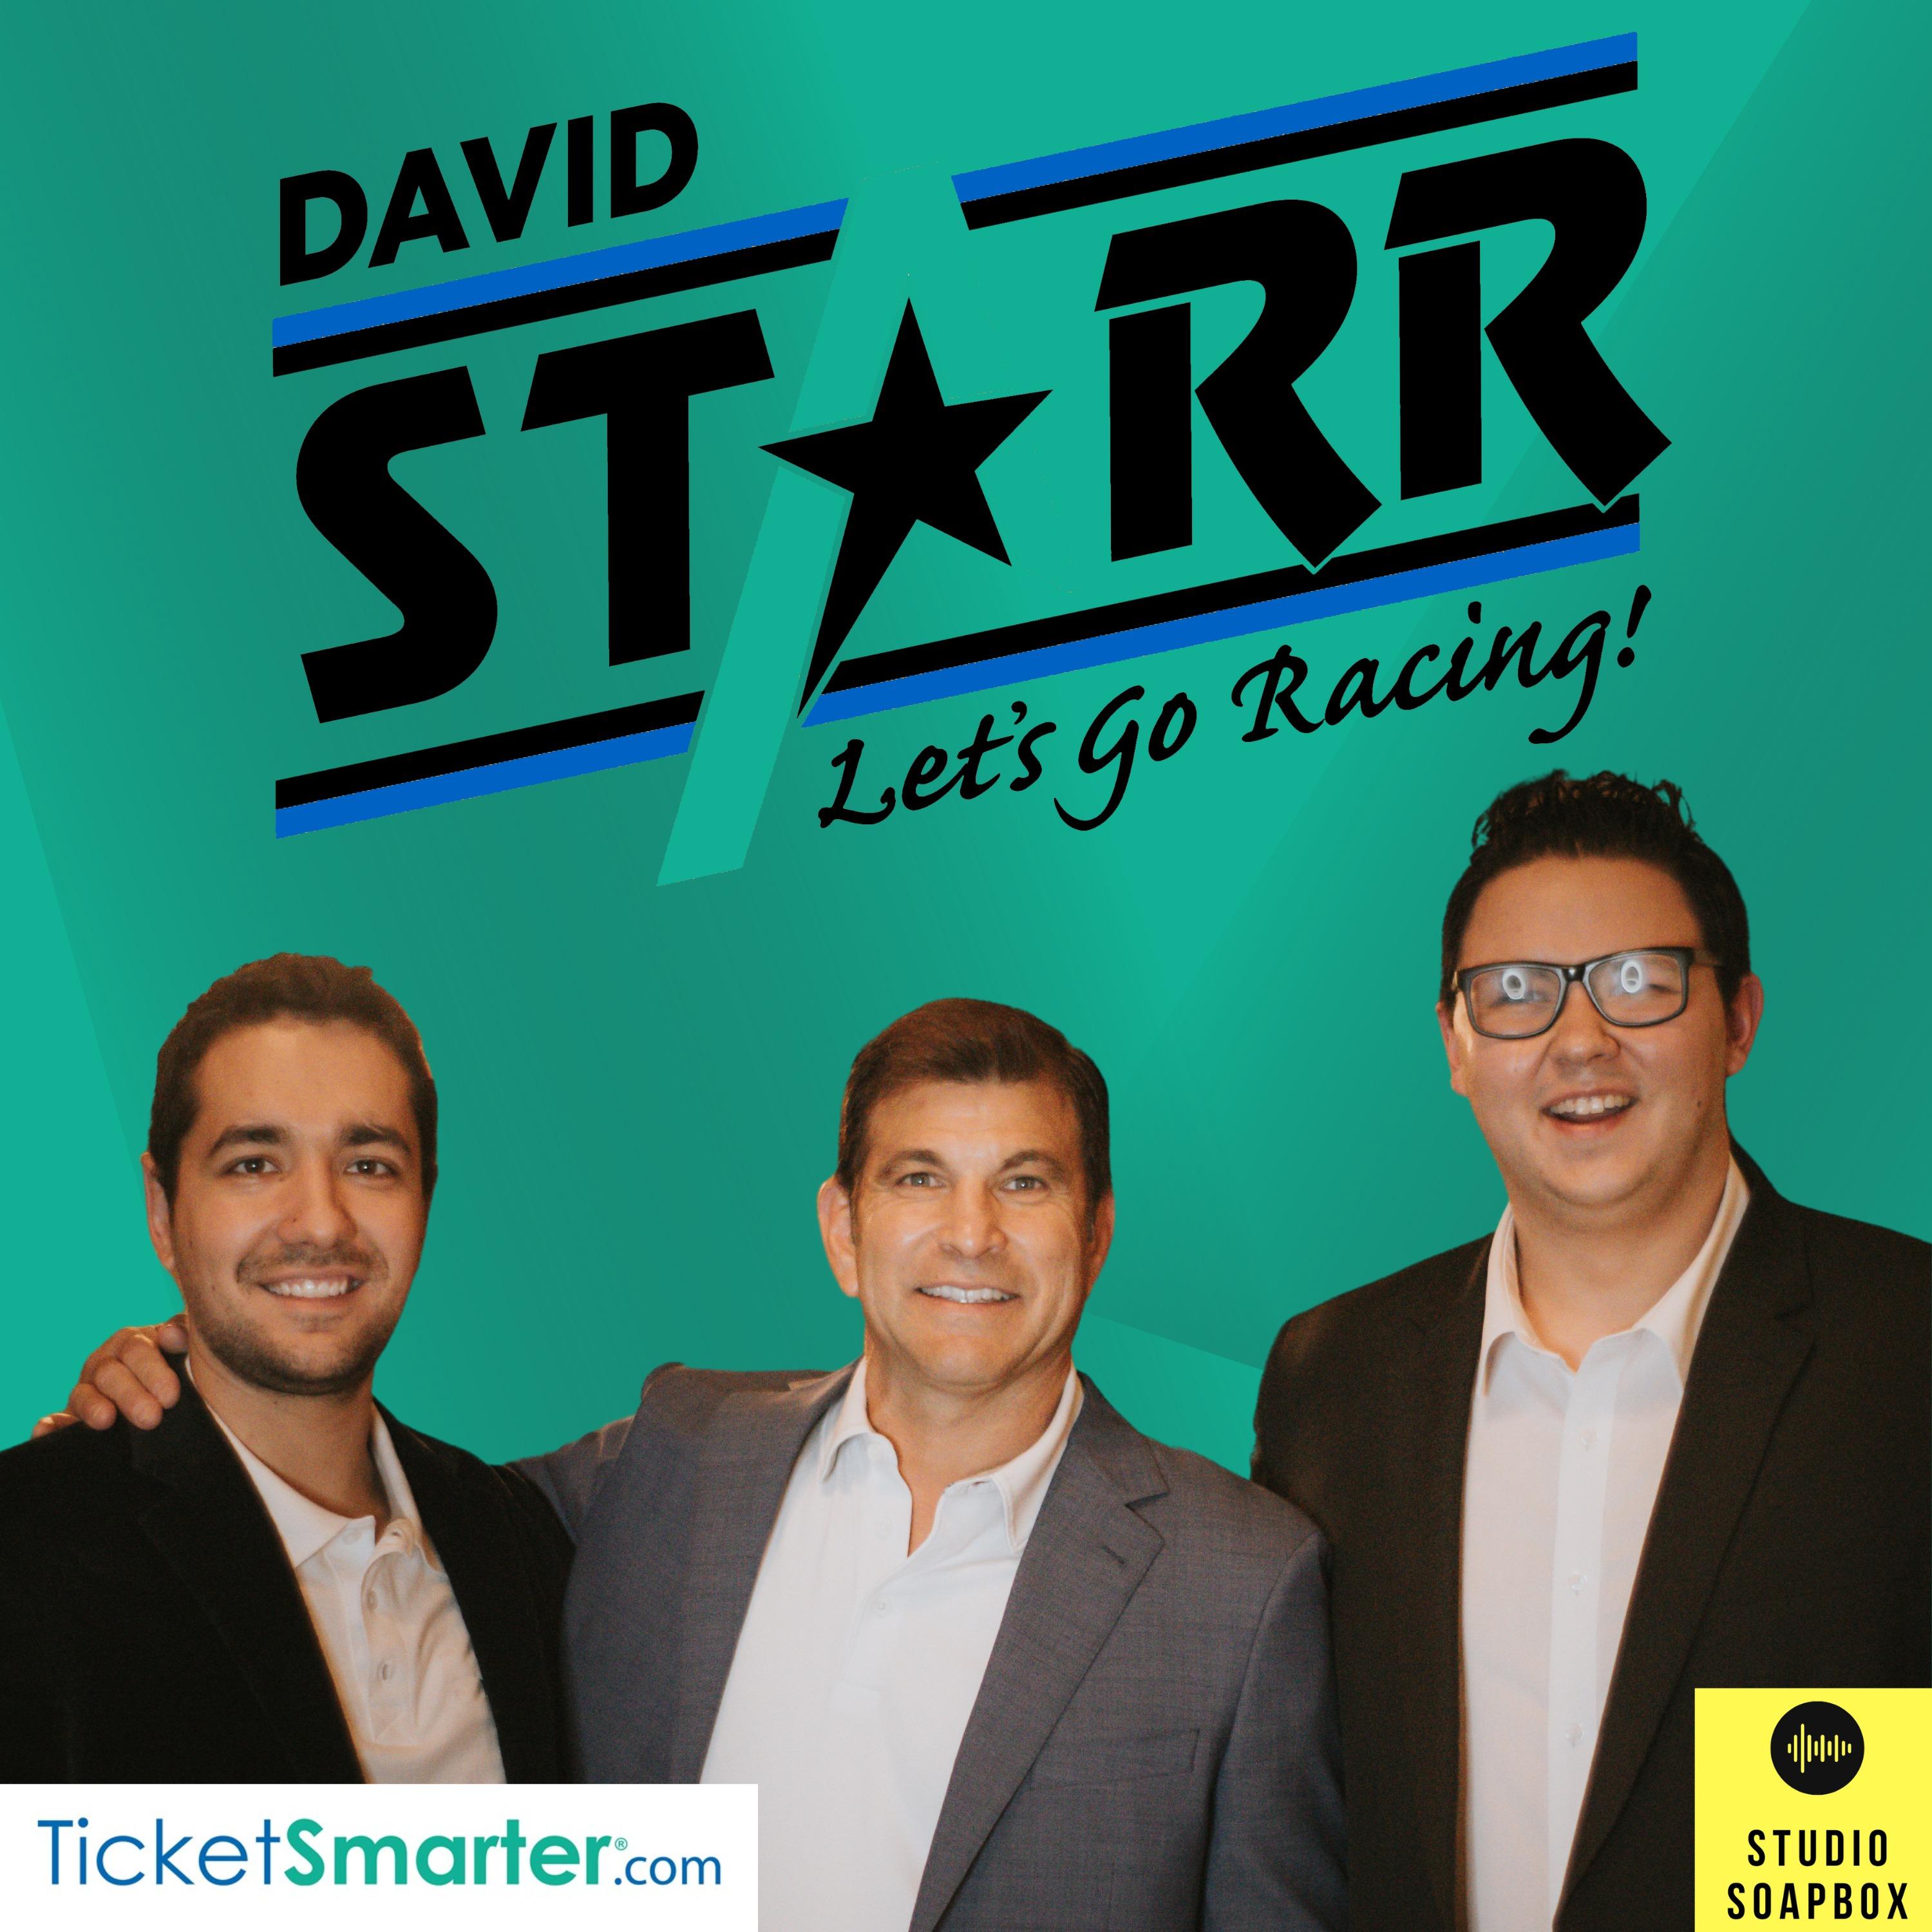 Let's Go Racing with David Starr